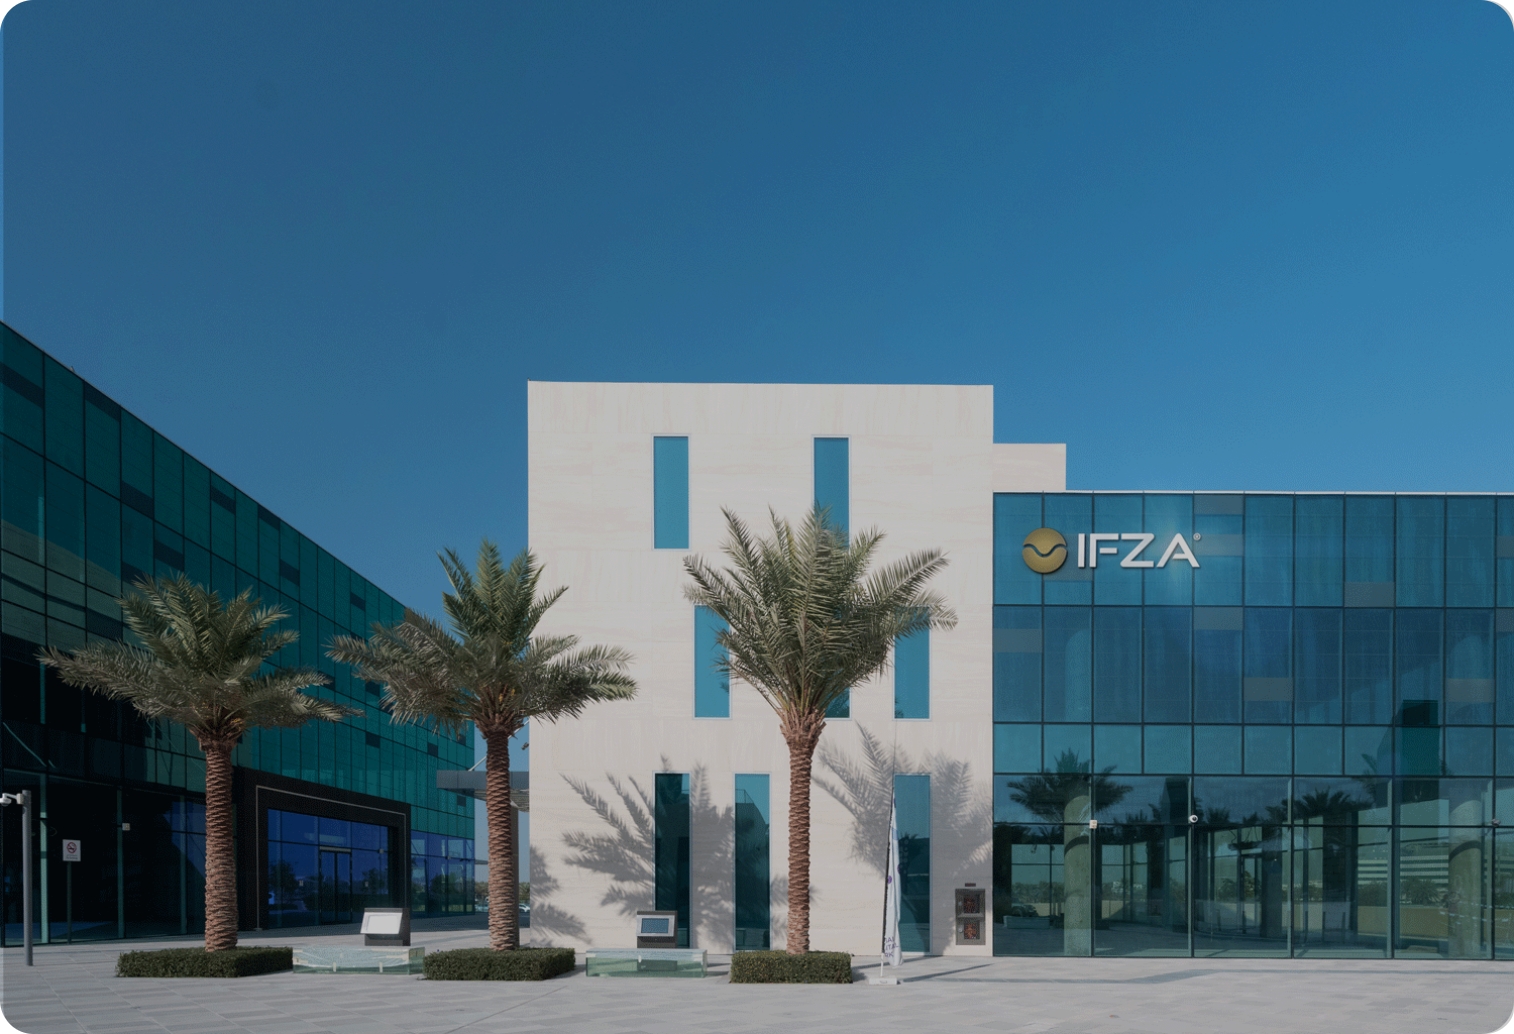 Everything You Need To Know About IFZA Licensing Dubai has become one of the most attractive places for business globally. With its favorable tax laws, world-class infrastructure, and strategic location, it is no surprise that businesses from across the globe are setting up shops in Dubai. One of Dubai's most popular free zones is the International Free Zone Authority (IFZA). This article will examine the IFZA license and everything you need to know about it. IFZA is a free zone in Dubai that was established in 2015. It offers a range of benefits to businesses looking to set up in Dubai, including 100% foreign ownership, 0% corporate and personal income tax, 100% repatriation of capital and profits, and no currency restrictions. IFZA is a popular choice for businesses looking to set up in Dubai due to its strategic location and world-class infrastructure. Types of IFZA license: An IFZA license is a legal document that allows a company to operate in IFZA. Three types of permits are available in IFZA: Trading, Service, and Industrial licenses. The type of license required will depend on the nature of the business. Trading license: A trading license is required for businesses that import, export, and trade goods specified in the license. The trading license is valid for one year and can be renewed annually. Service license: A service license is required for businesses that provide services specified in the license. The service license is valid for one year and can be renewed annually. Industrial license: An industrial license is required for businesses that carry out manufacturing, assembling, and other industrial activities. The industrial license is valid for one year and can be renewed annually. If you are considering investing in IFZA, this information will help you make informed decision. IFZA is a popular choice for businesses looking to set up in Dubai due to its favorable tax laws, world-class infrastructure, and strategic location. An IFZA license is a legal document that allows a company to operate in IFZA. Three types of licenses are available in IFZA: Trading, Service, and Industrial. Obtaining an IFZA license is relatively straightforward, and the processing time is around 5-7 working days.